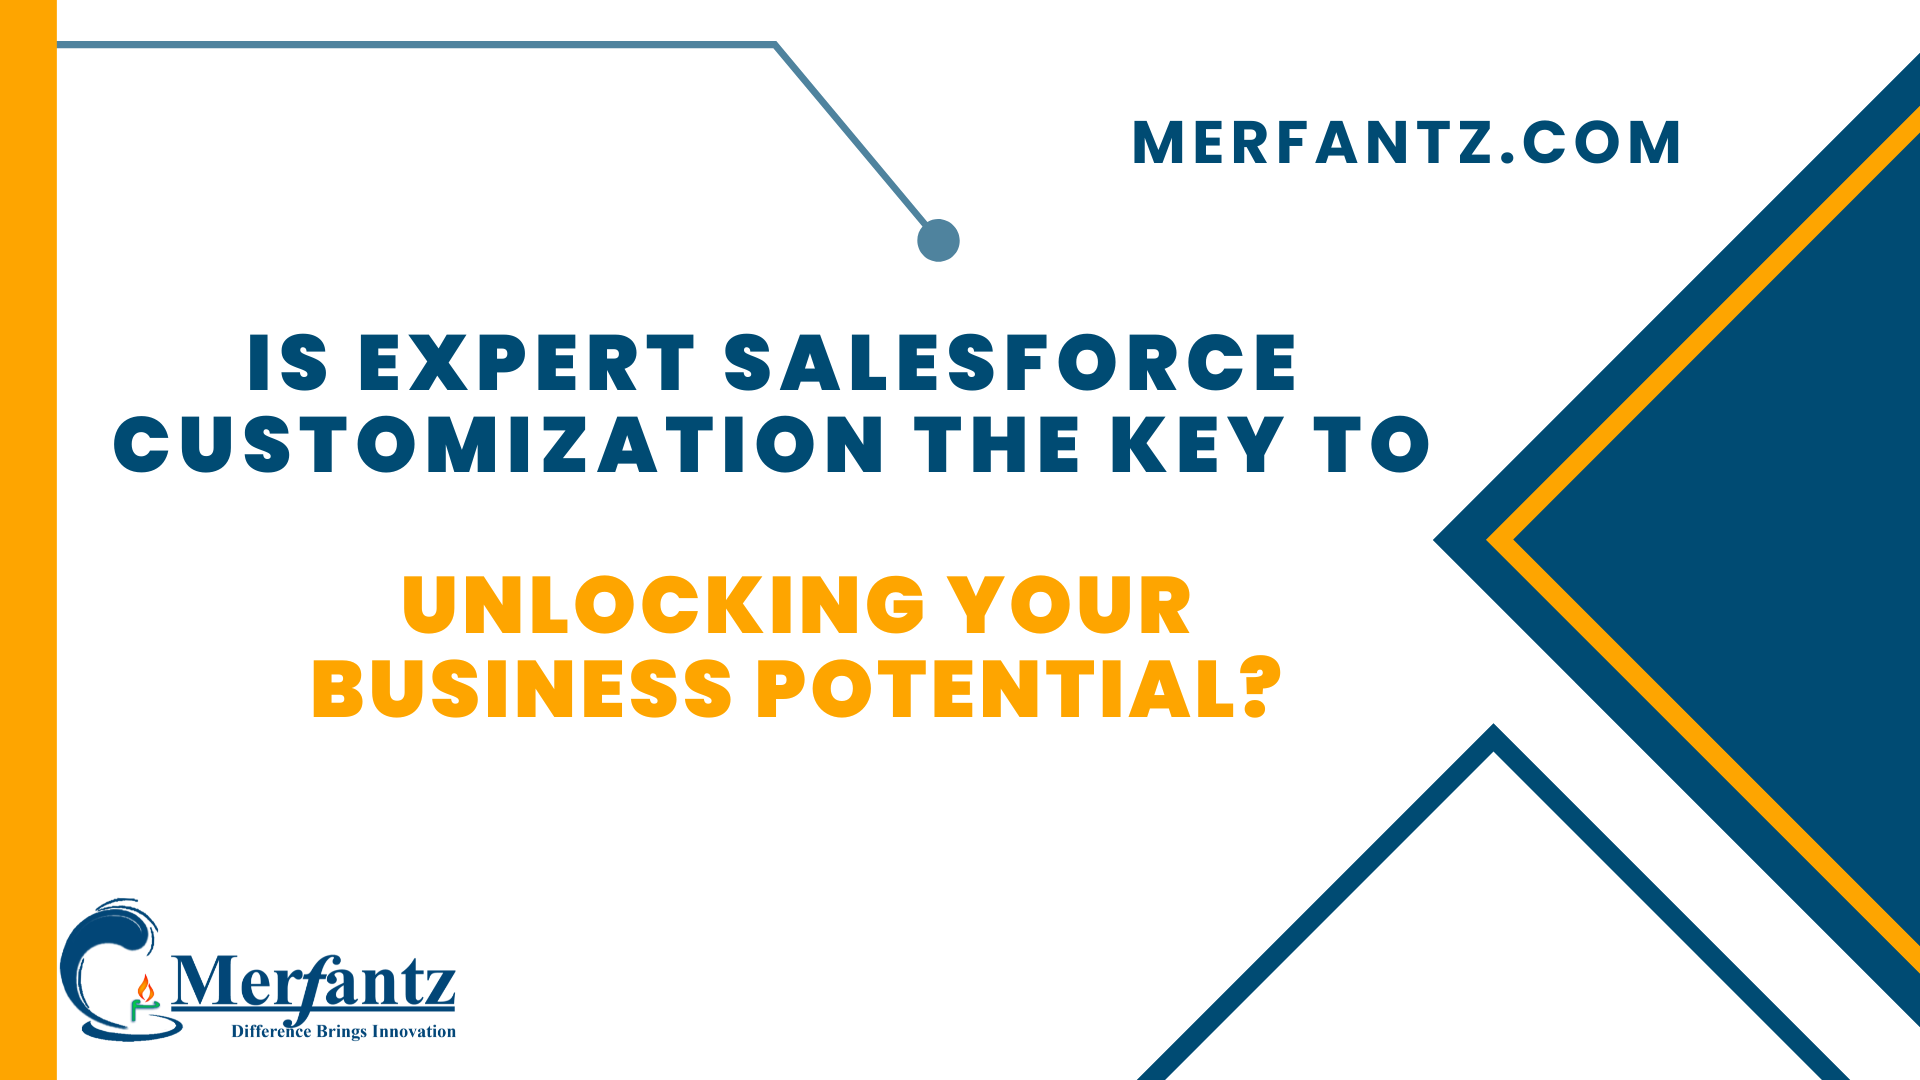 Is Expert Salesforce Customization the Key to Unlocking Your Business Potential